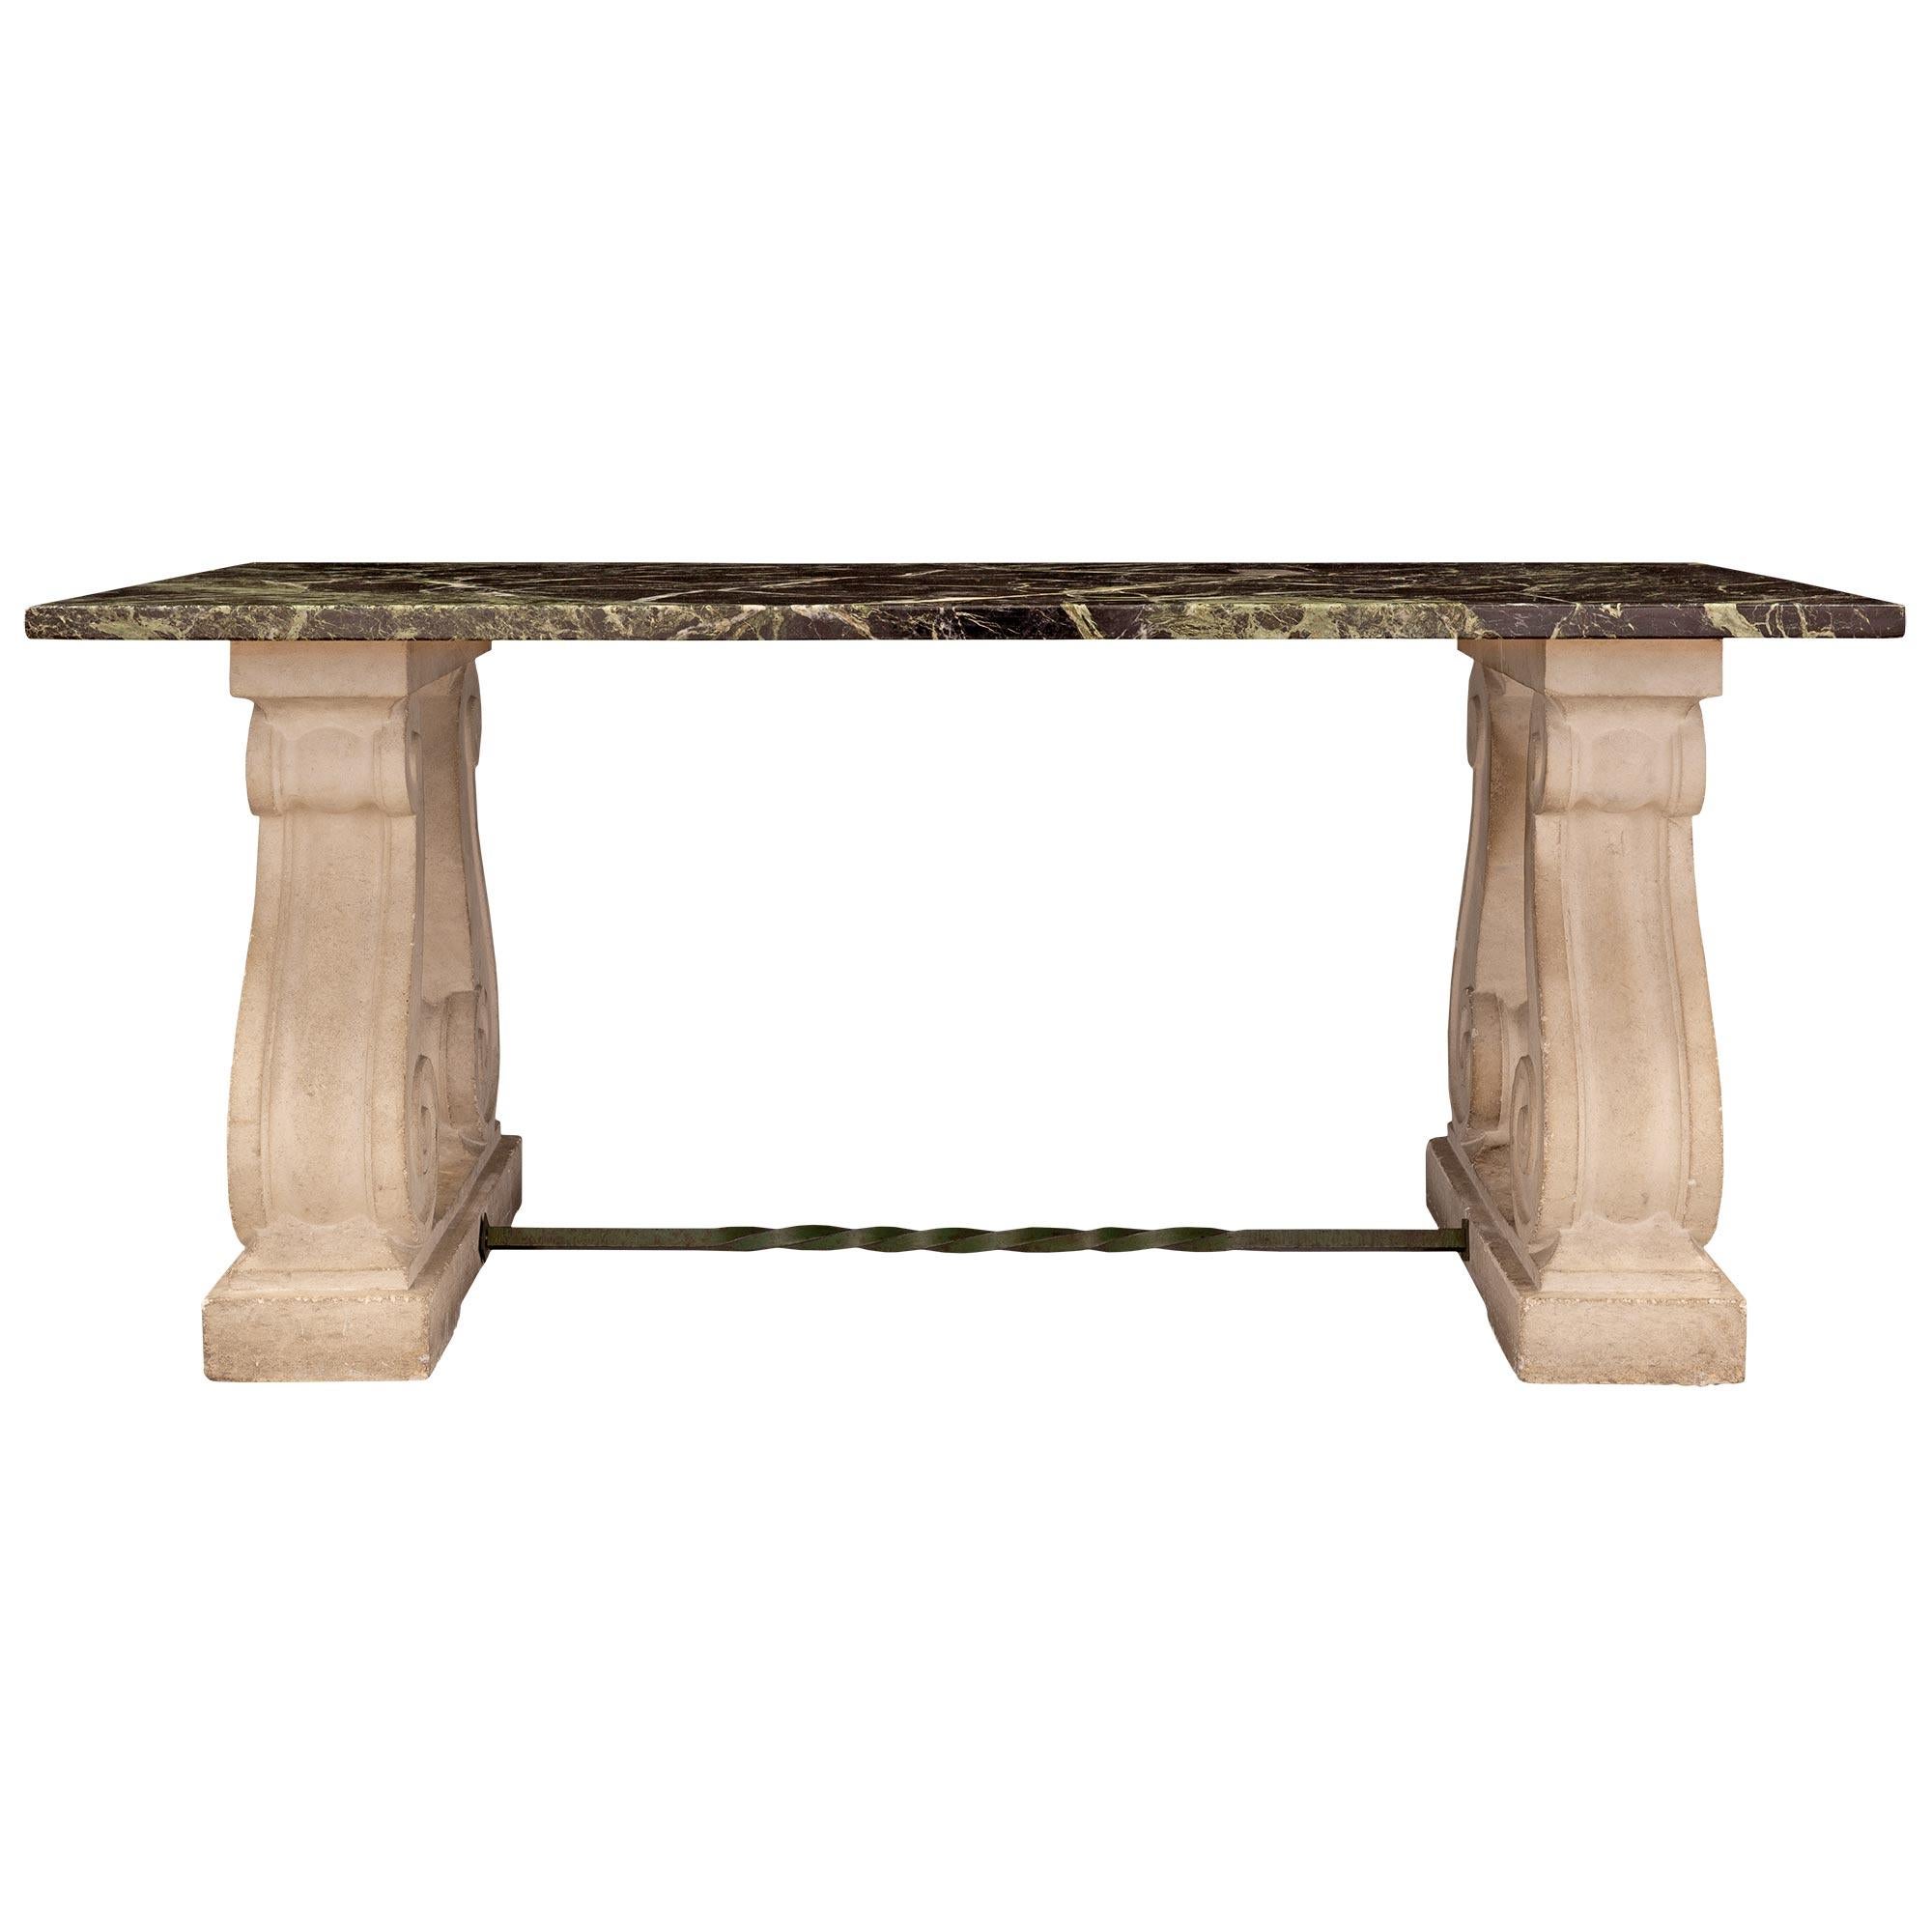 French 19th Century Marble and Limestone Center Table